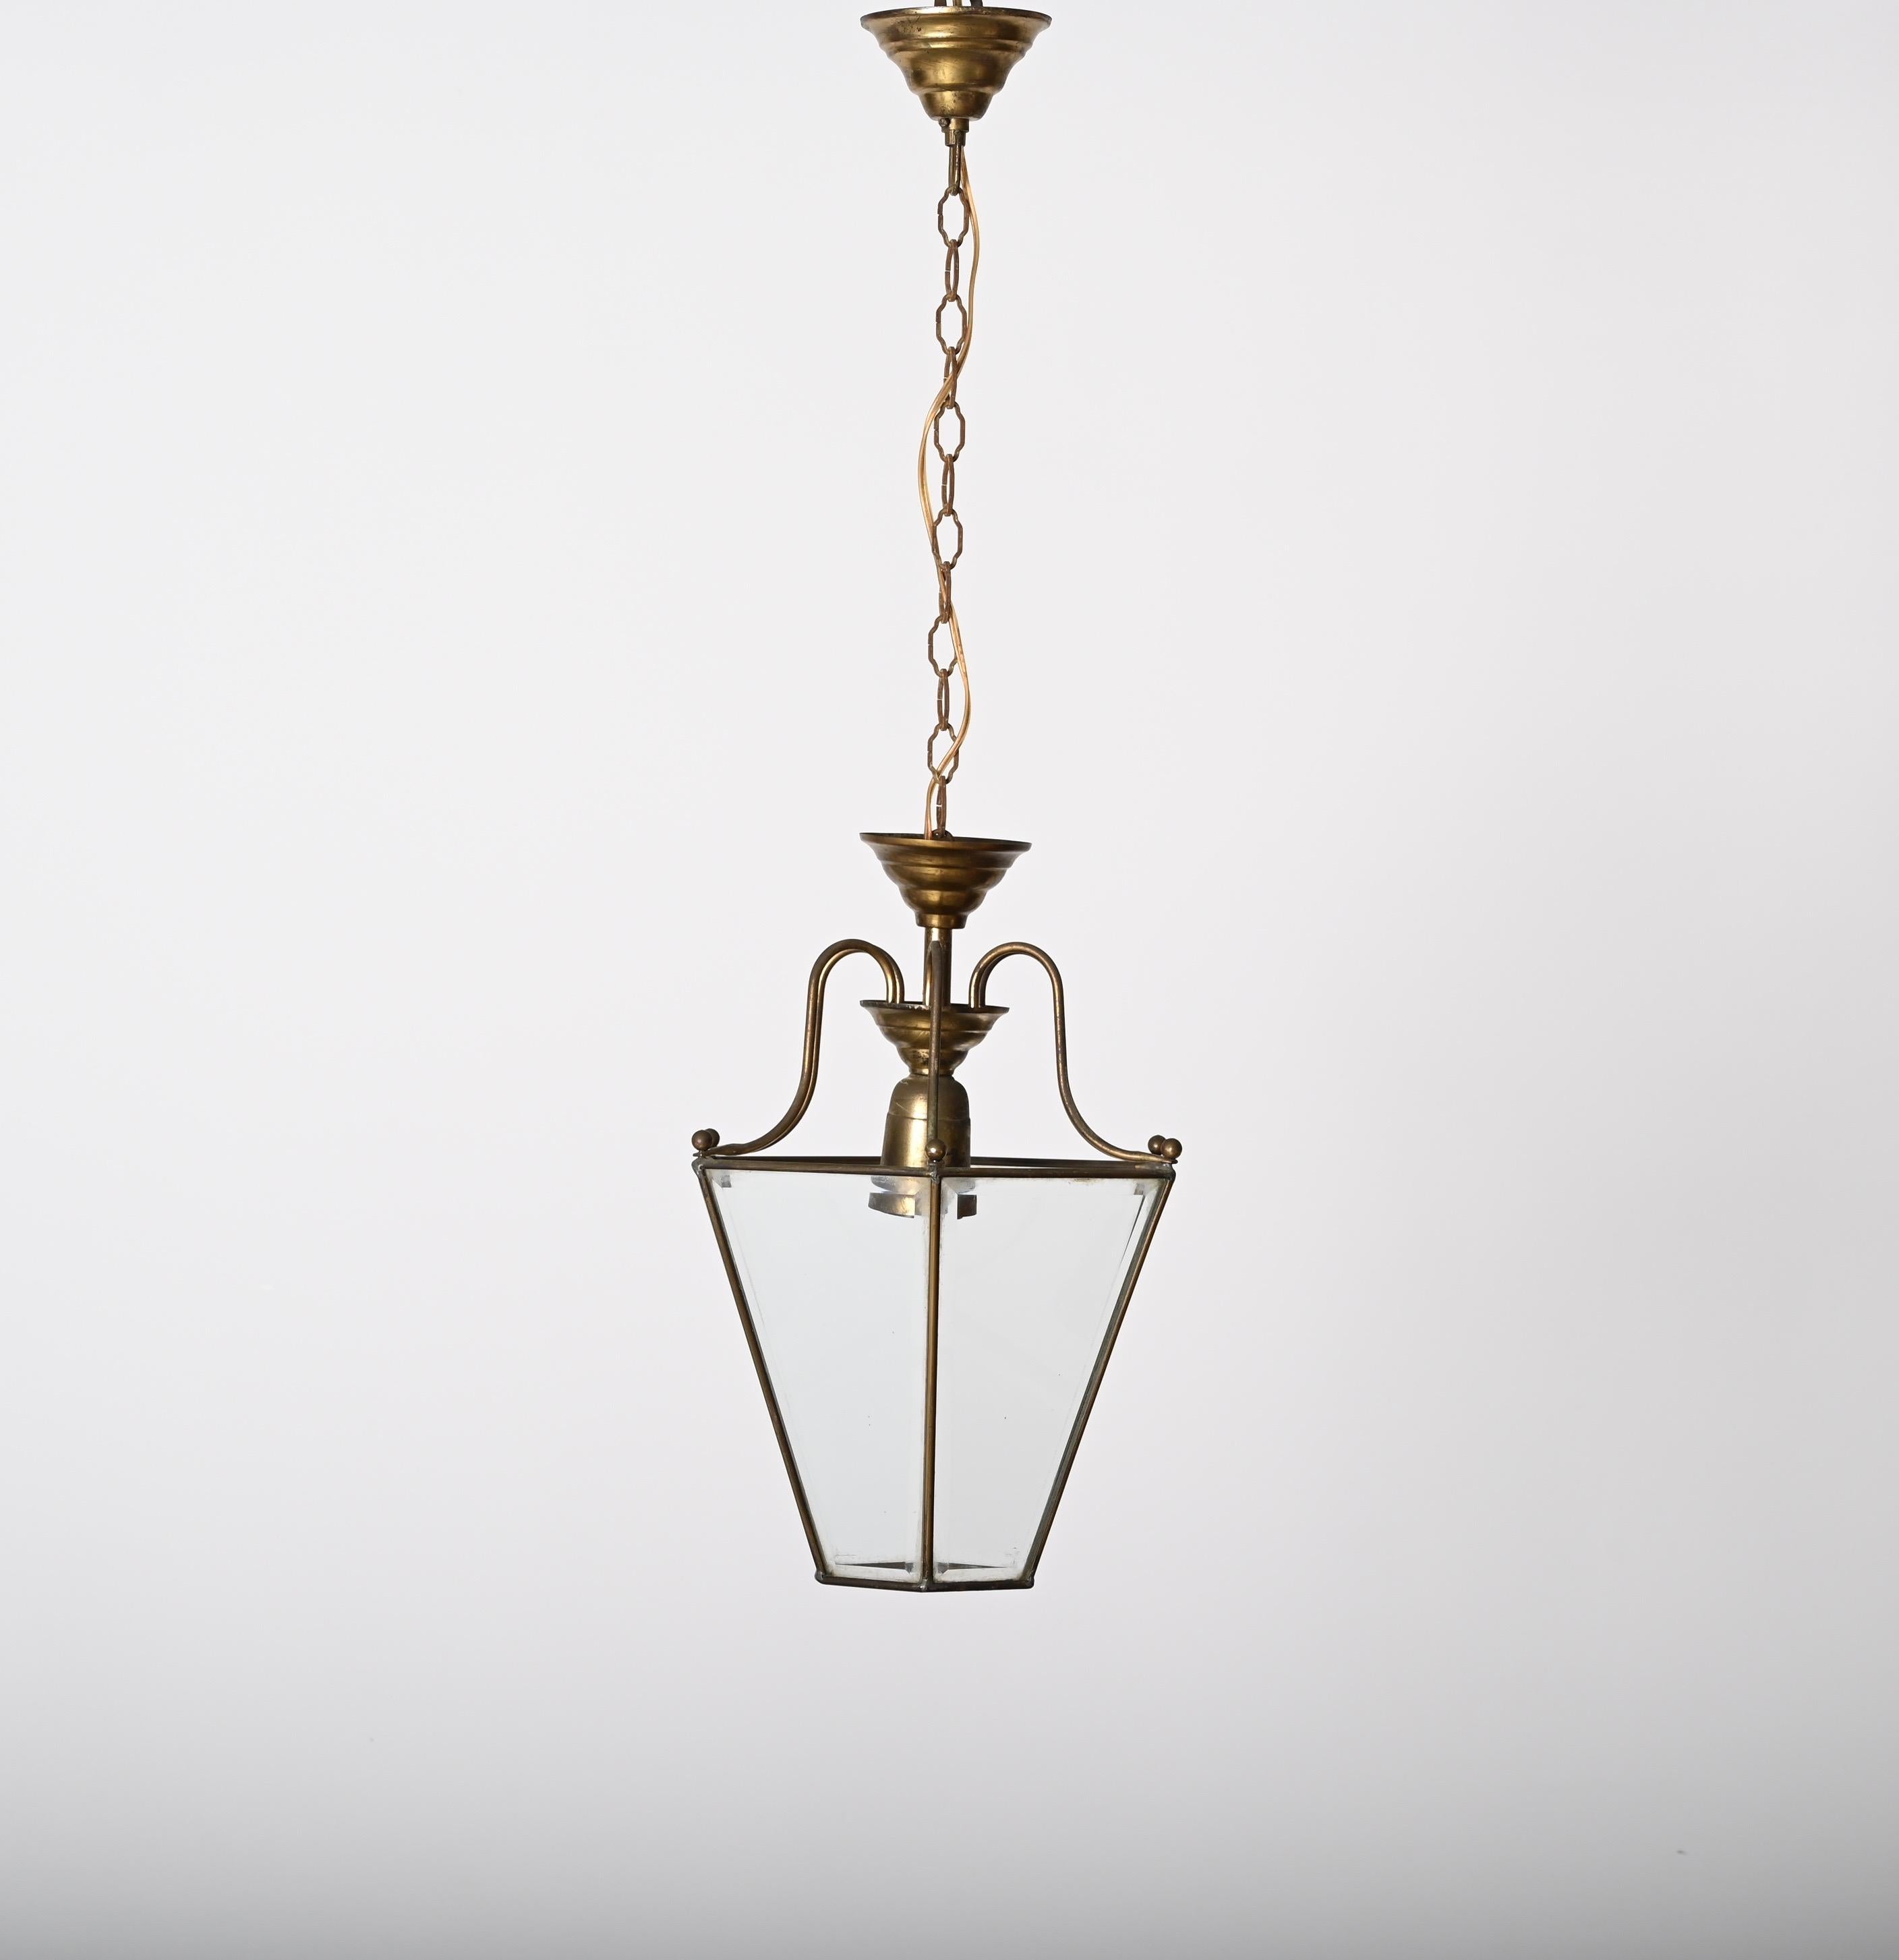 Brass and Beveled Glass Hexagonal Italian Chandelier After Adolf Loos, 1950s For Sale 7